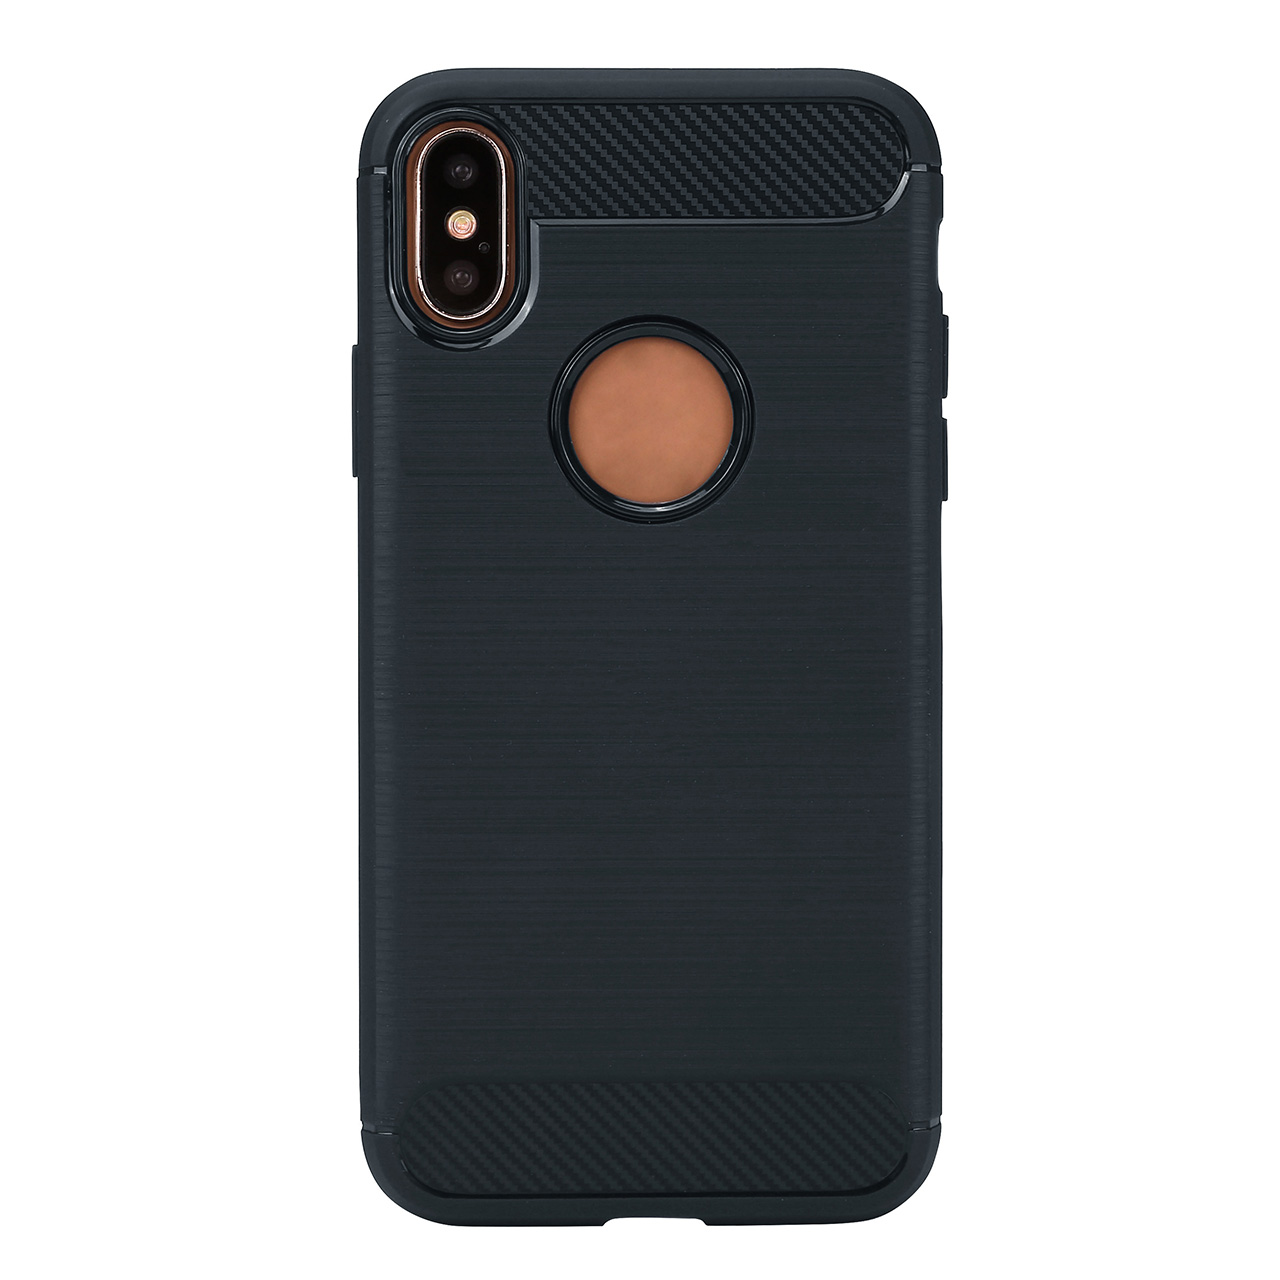 ACBungji iPhone X Case Cover Soft TPU Carbon Fiber Protective Cover Slim Fit for iPhone X / iPhone 10 (Navy)